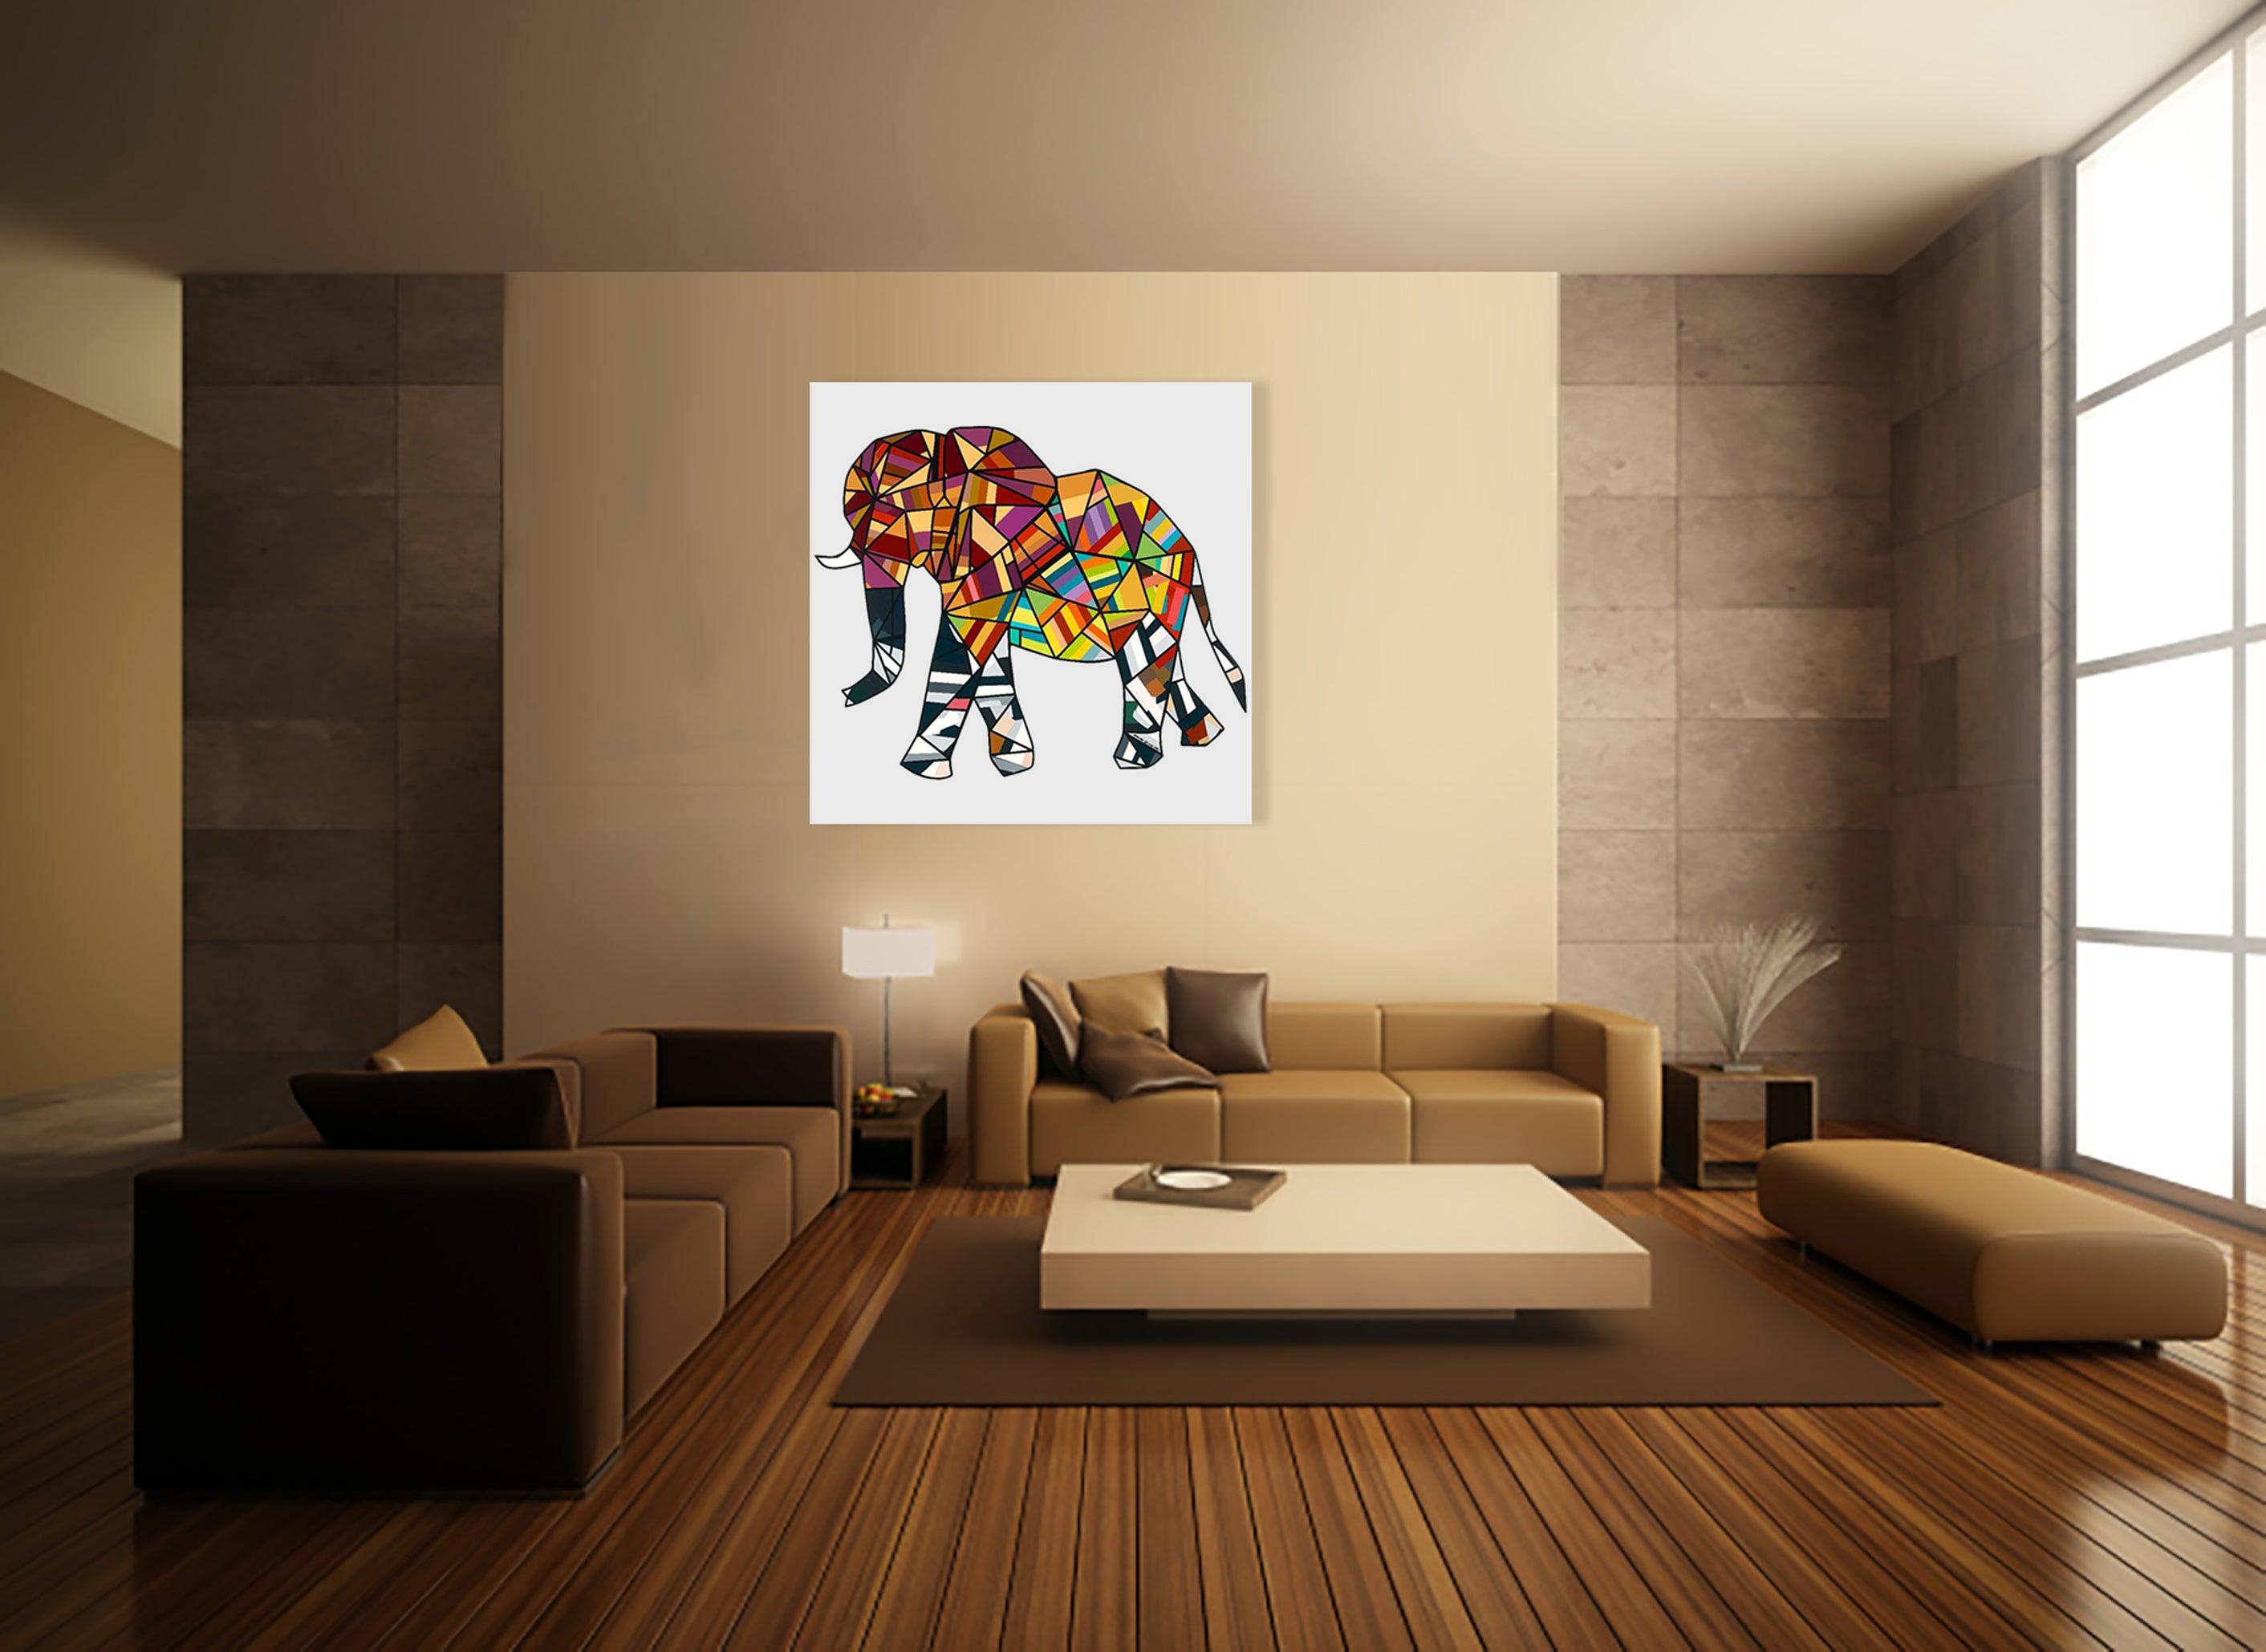 Celebrating the wild life with this colorful piece.

**IMPORTANT: This is a Limited edition of 30 museum quality prints on CANVAS, signed and numbered by the artist. It will arrive rolled inside a tube. 

A 